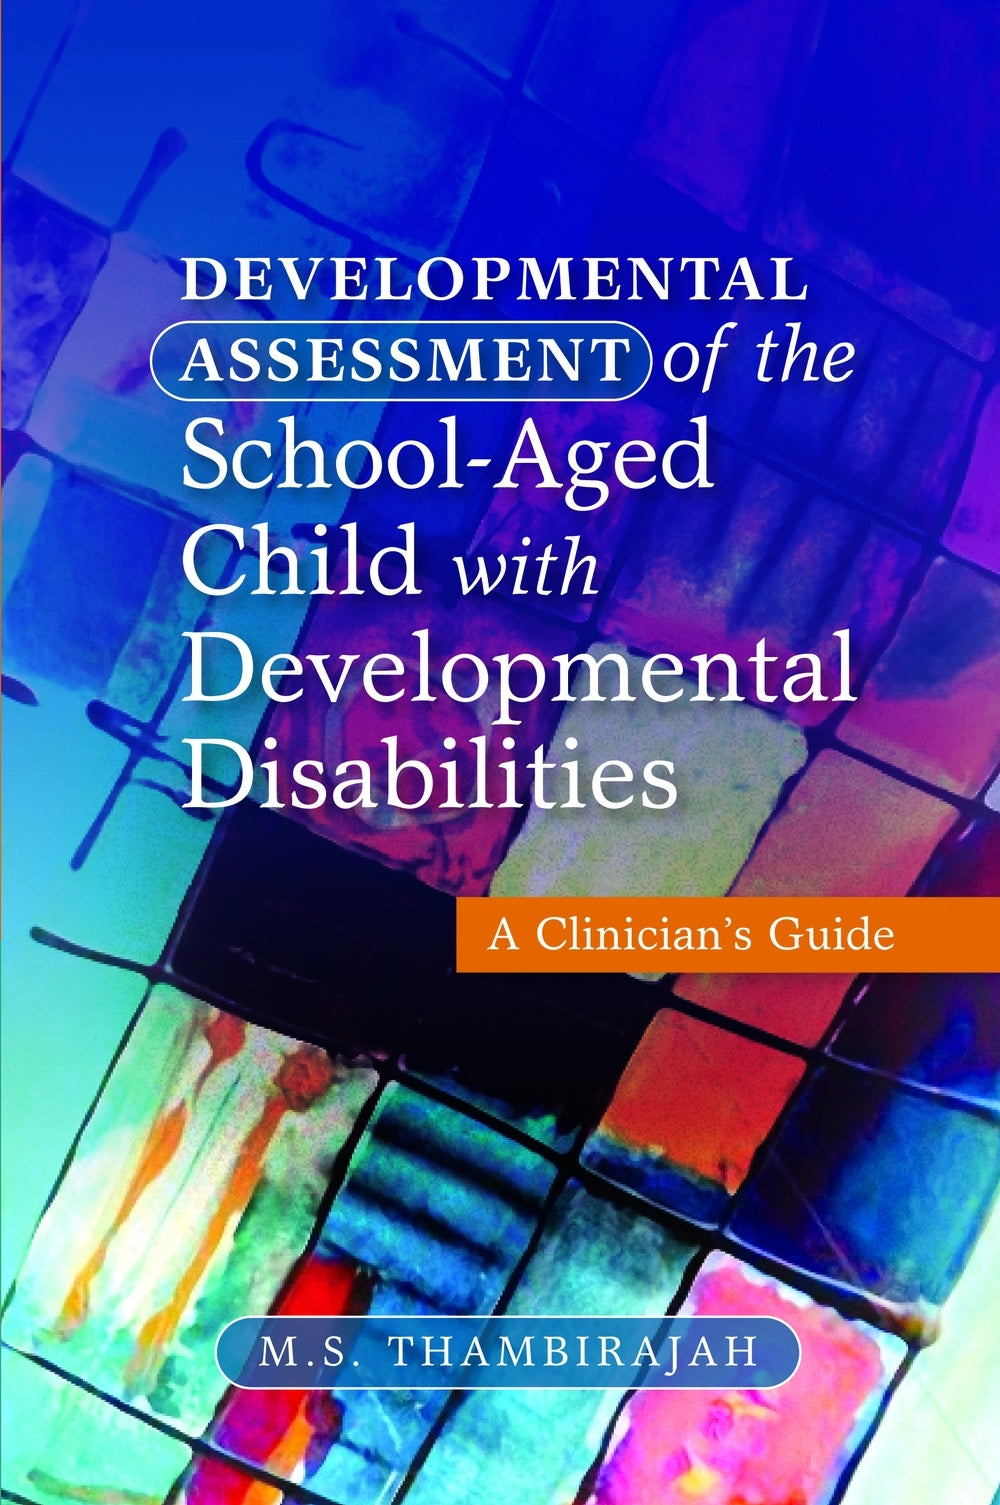 Developmental Assessment of the School-Aged Child with Developmental Disabilities by M. S. Thambirajah